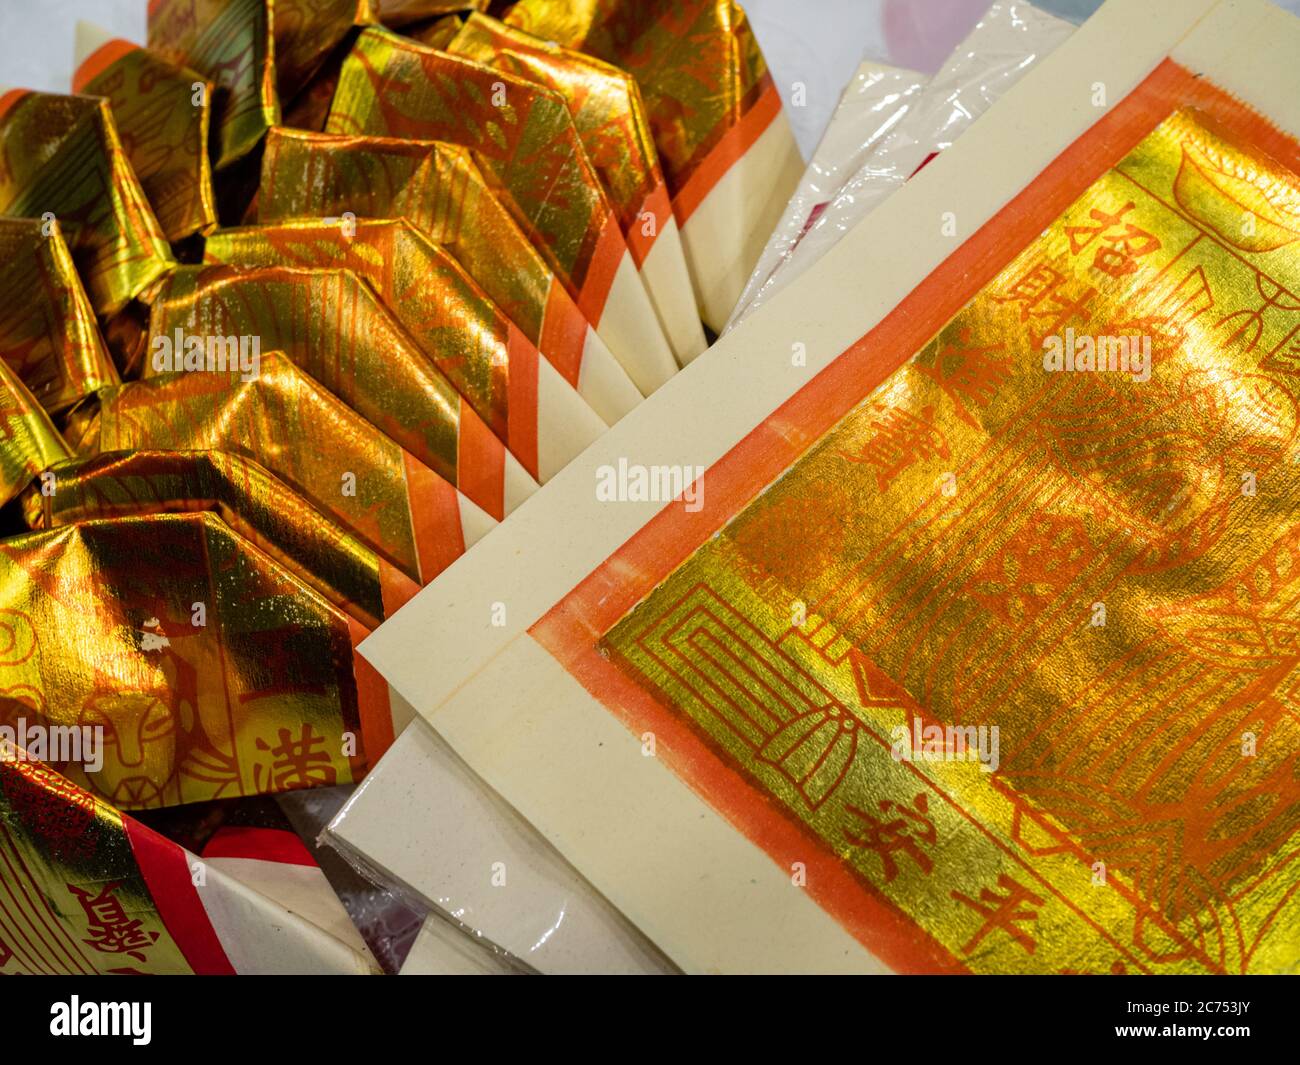 Gold Chinese joss paper aka ghost money, spirit money or hell bank notes folded into the shape of a Chinese gold ingot for ancestral worship or prayer Stock Photo